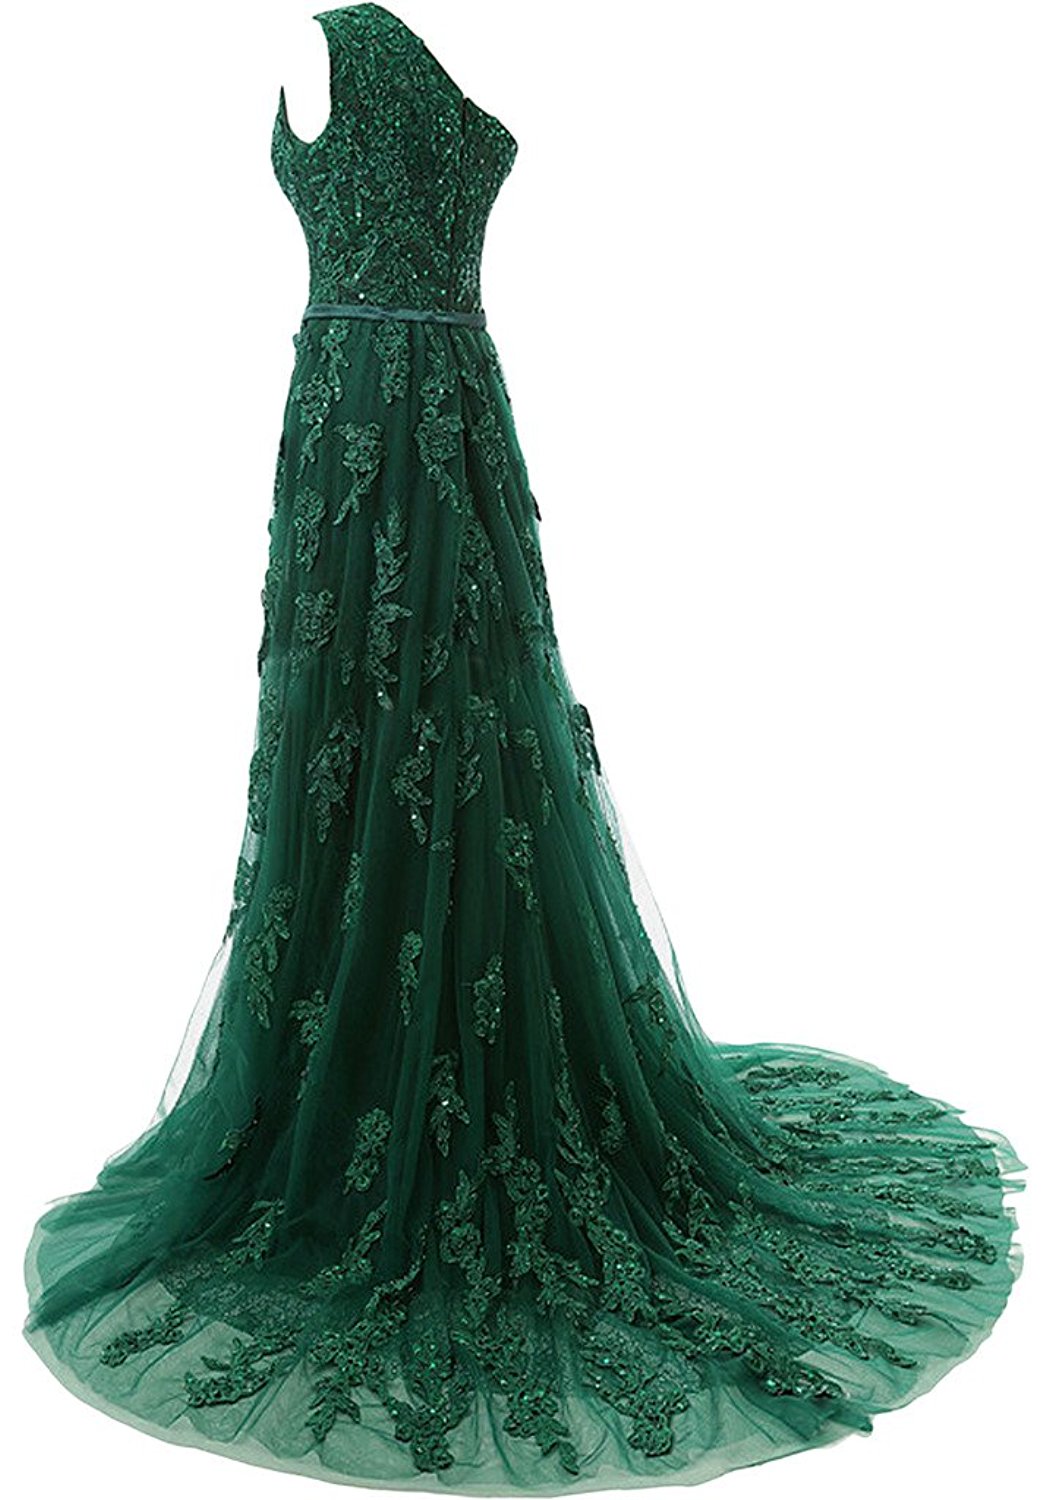 Forest Green Lace Appliqués Tulle Floor Length Prom Dress Featuring One ...